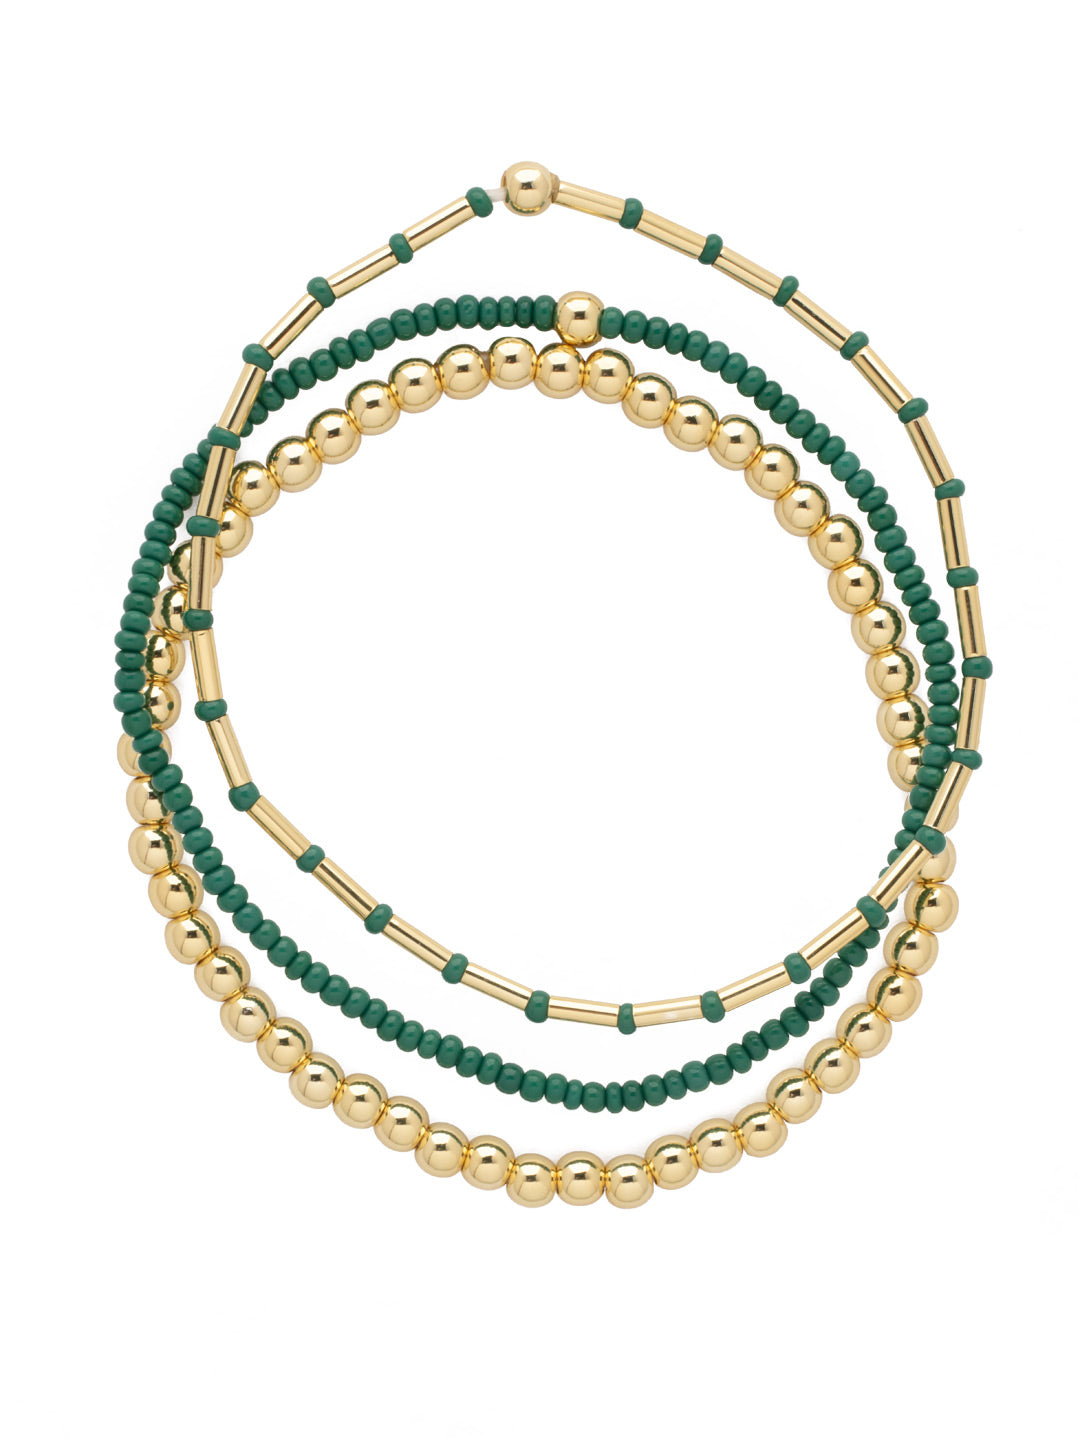 Trina Stretch Bracelet - BFM5BGGA - <p>The Trina Stretch Bracelets features 3 assorted stretch bracelets; perfect to mix, match, and stack with your favorite bracelets! From Sorrelli's Green Apple collection in our Bright Gold-tone finish.</p>